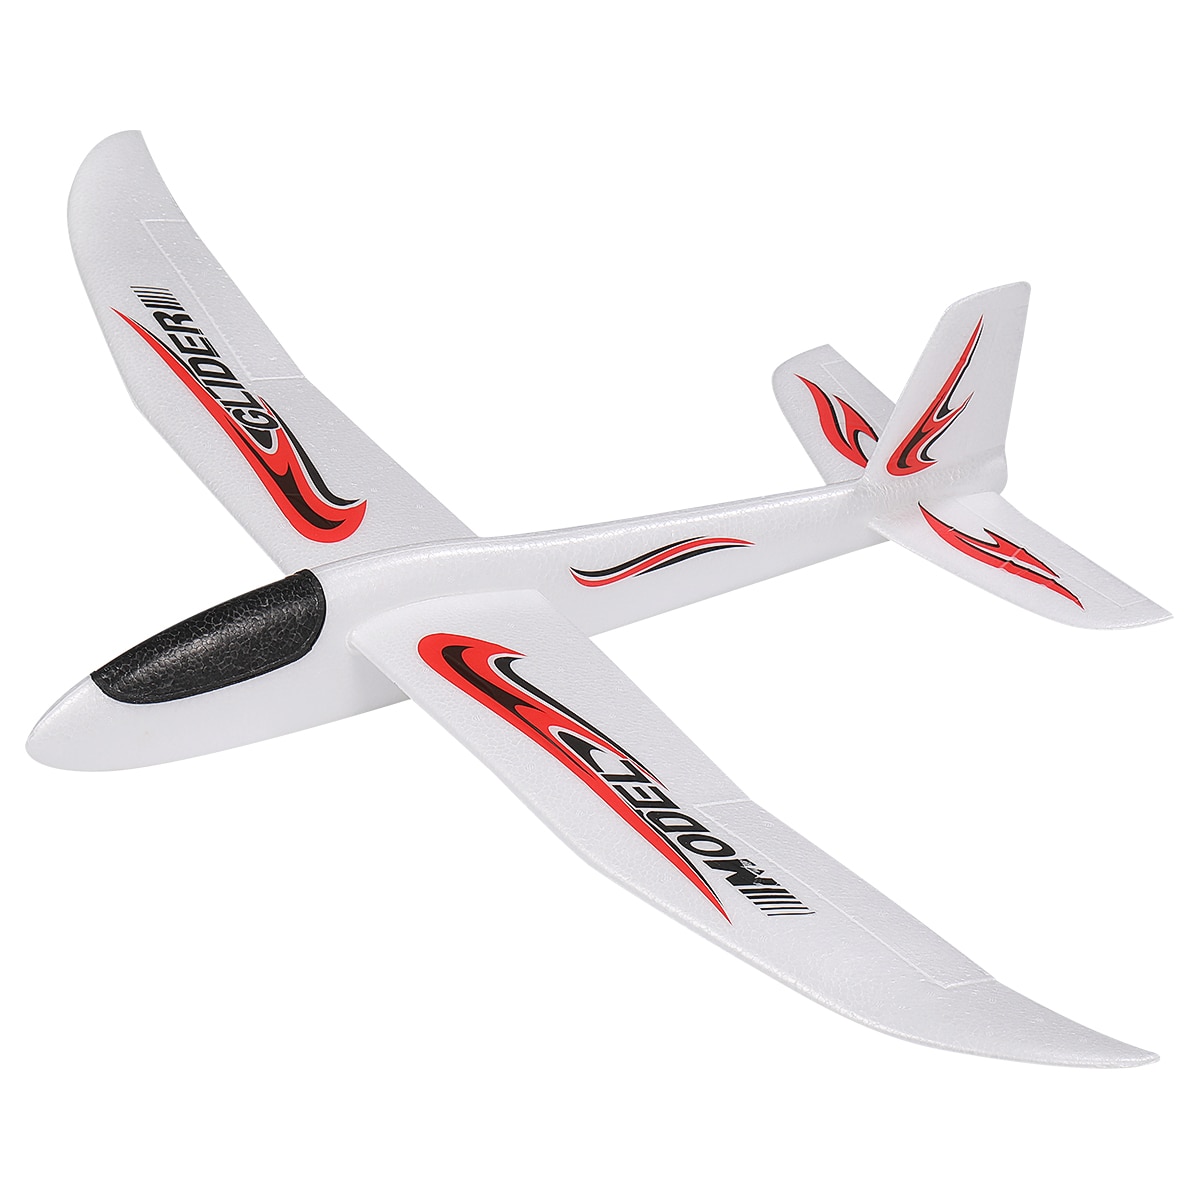 Airplane Foam Kids Glider Toy Toys Plane Airplanes Throwing Flying Model